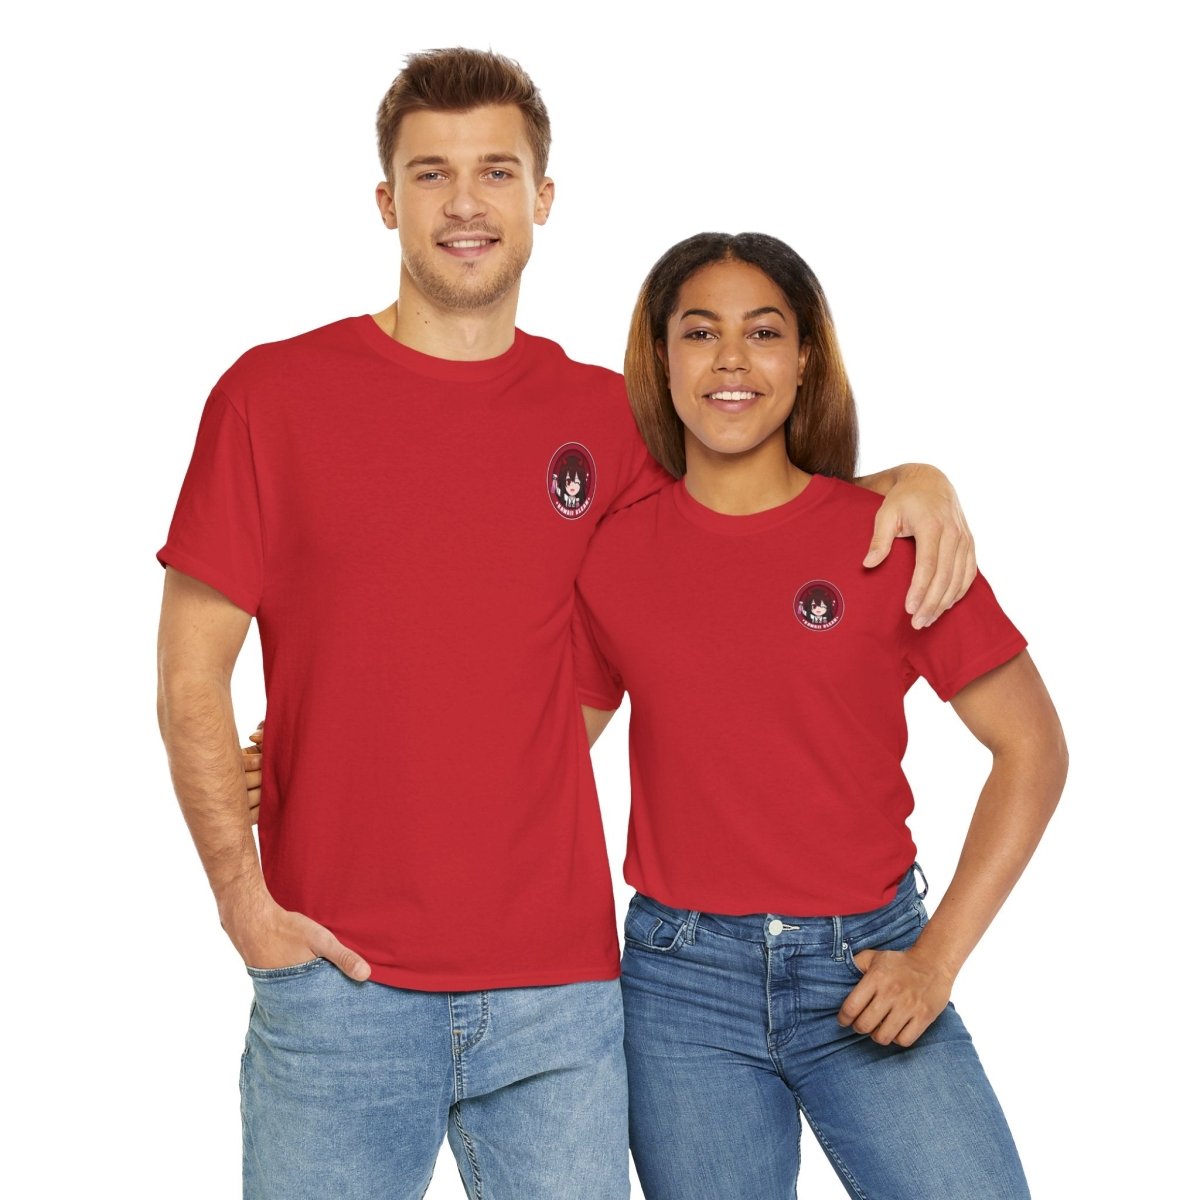 Male and female models together, showcasing red T-shirts with a matching red 'Kawaii Klean' logo on the left chest, highlighting the bold monochromatic look and brand identity.